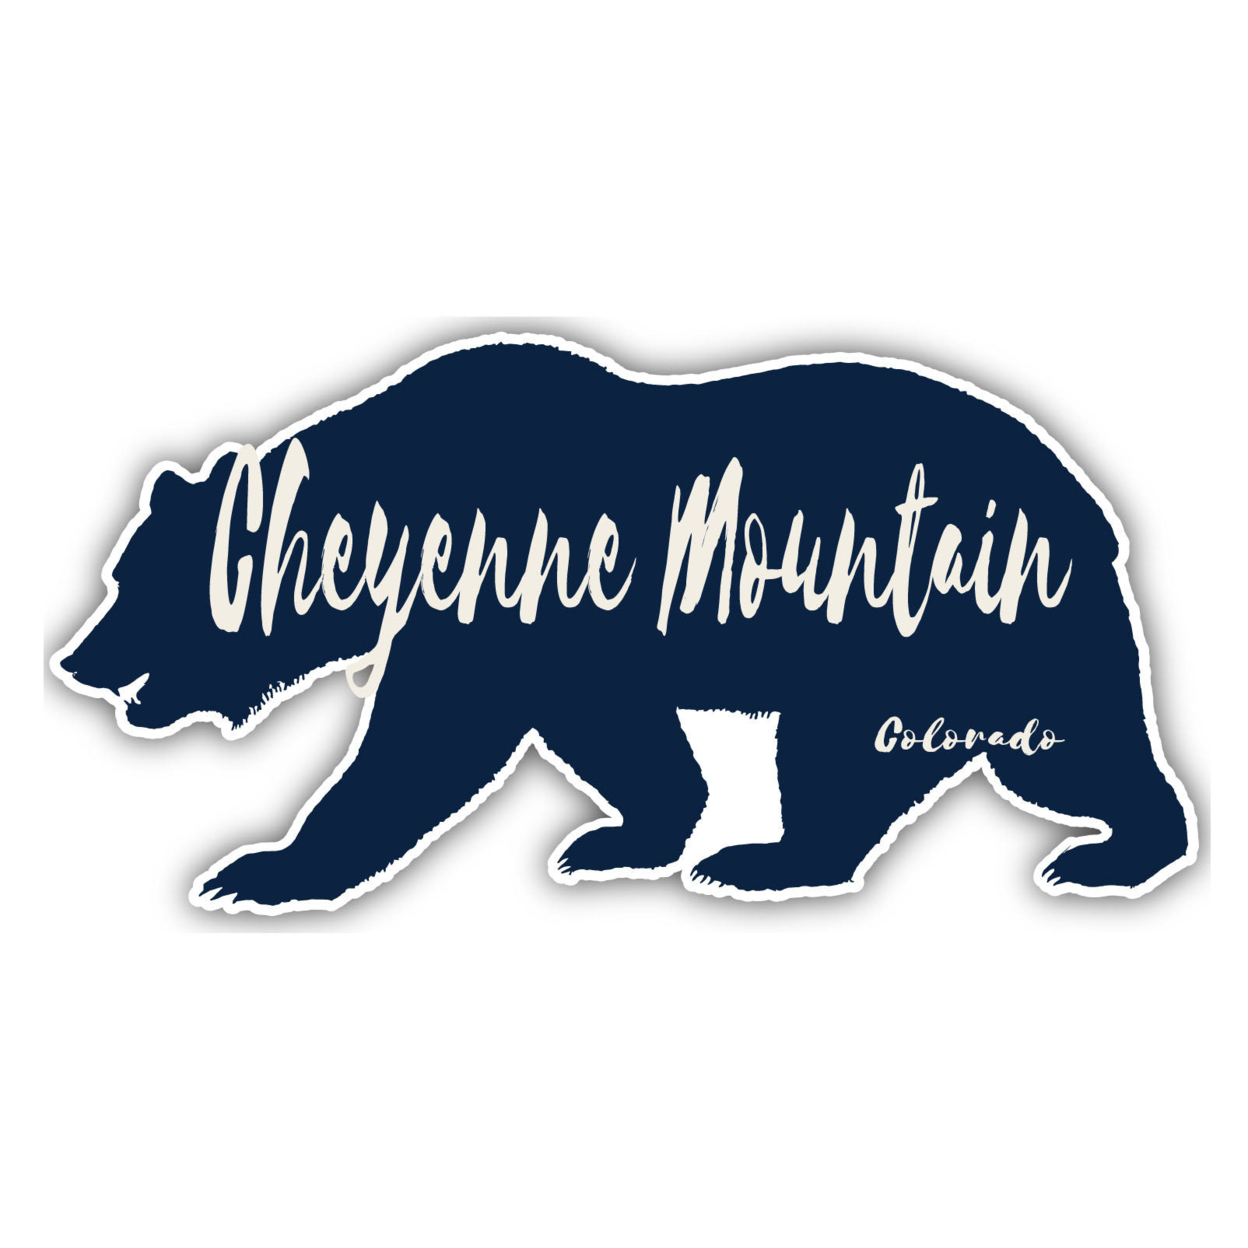 Cheyenne Mountain Colorado Souvenir Decorative Stickers (Choose Theme And Size) - 4-Pack, 12-Inch, Tent